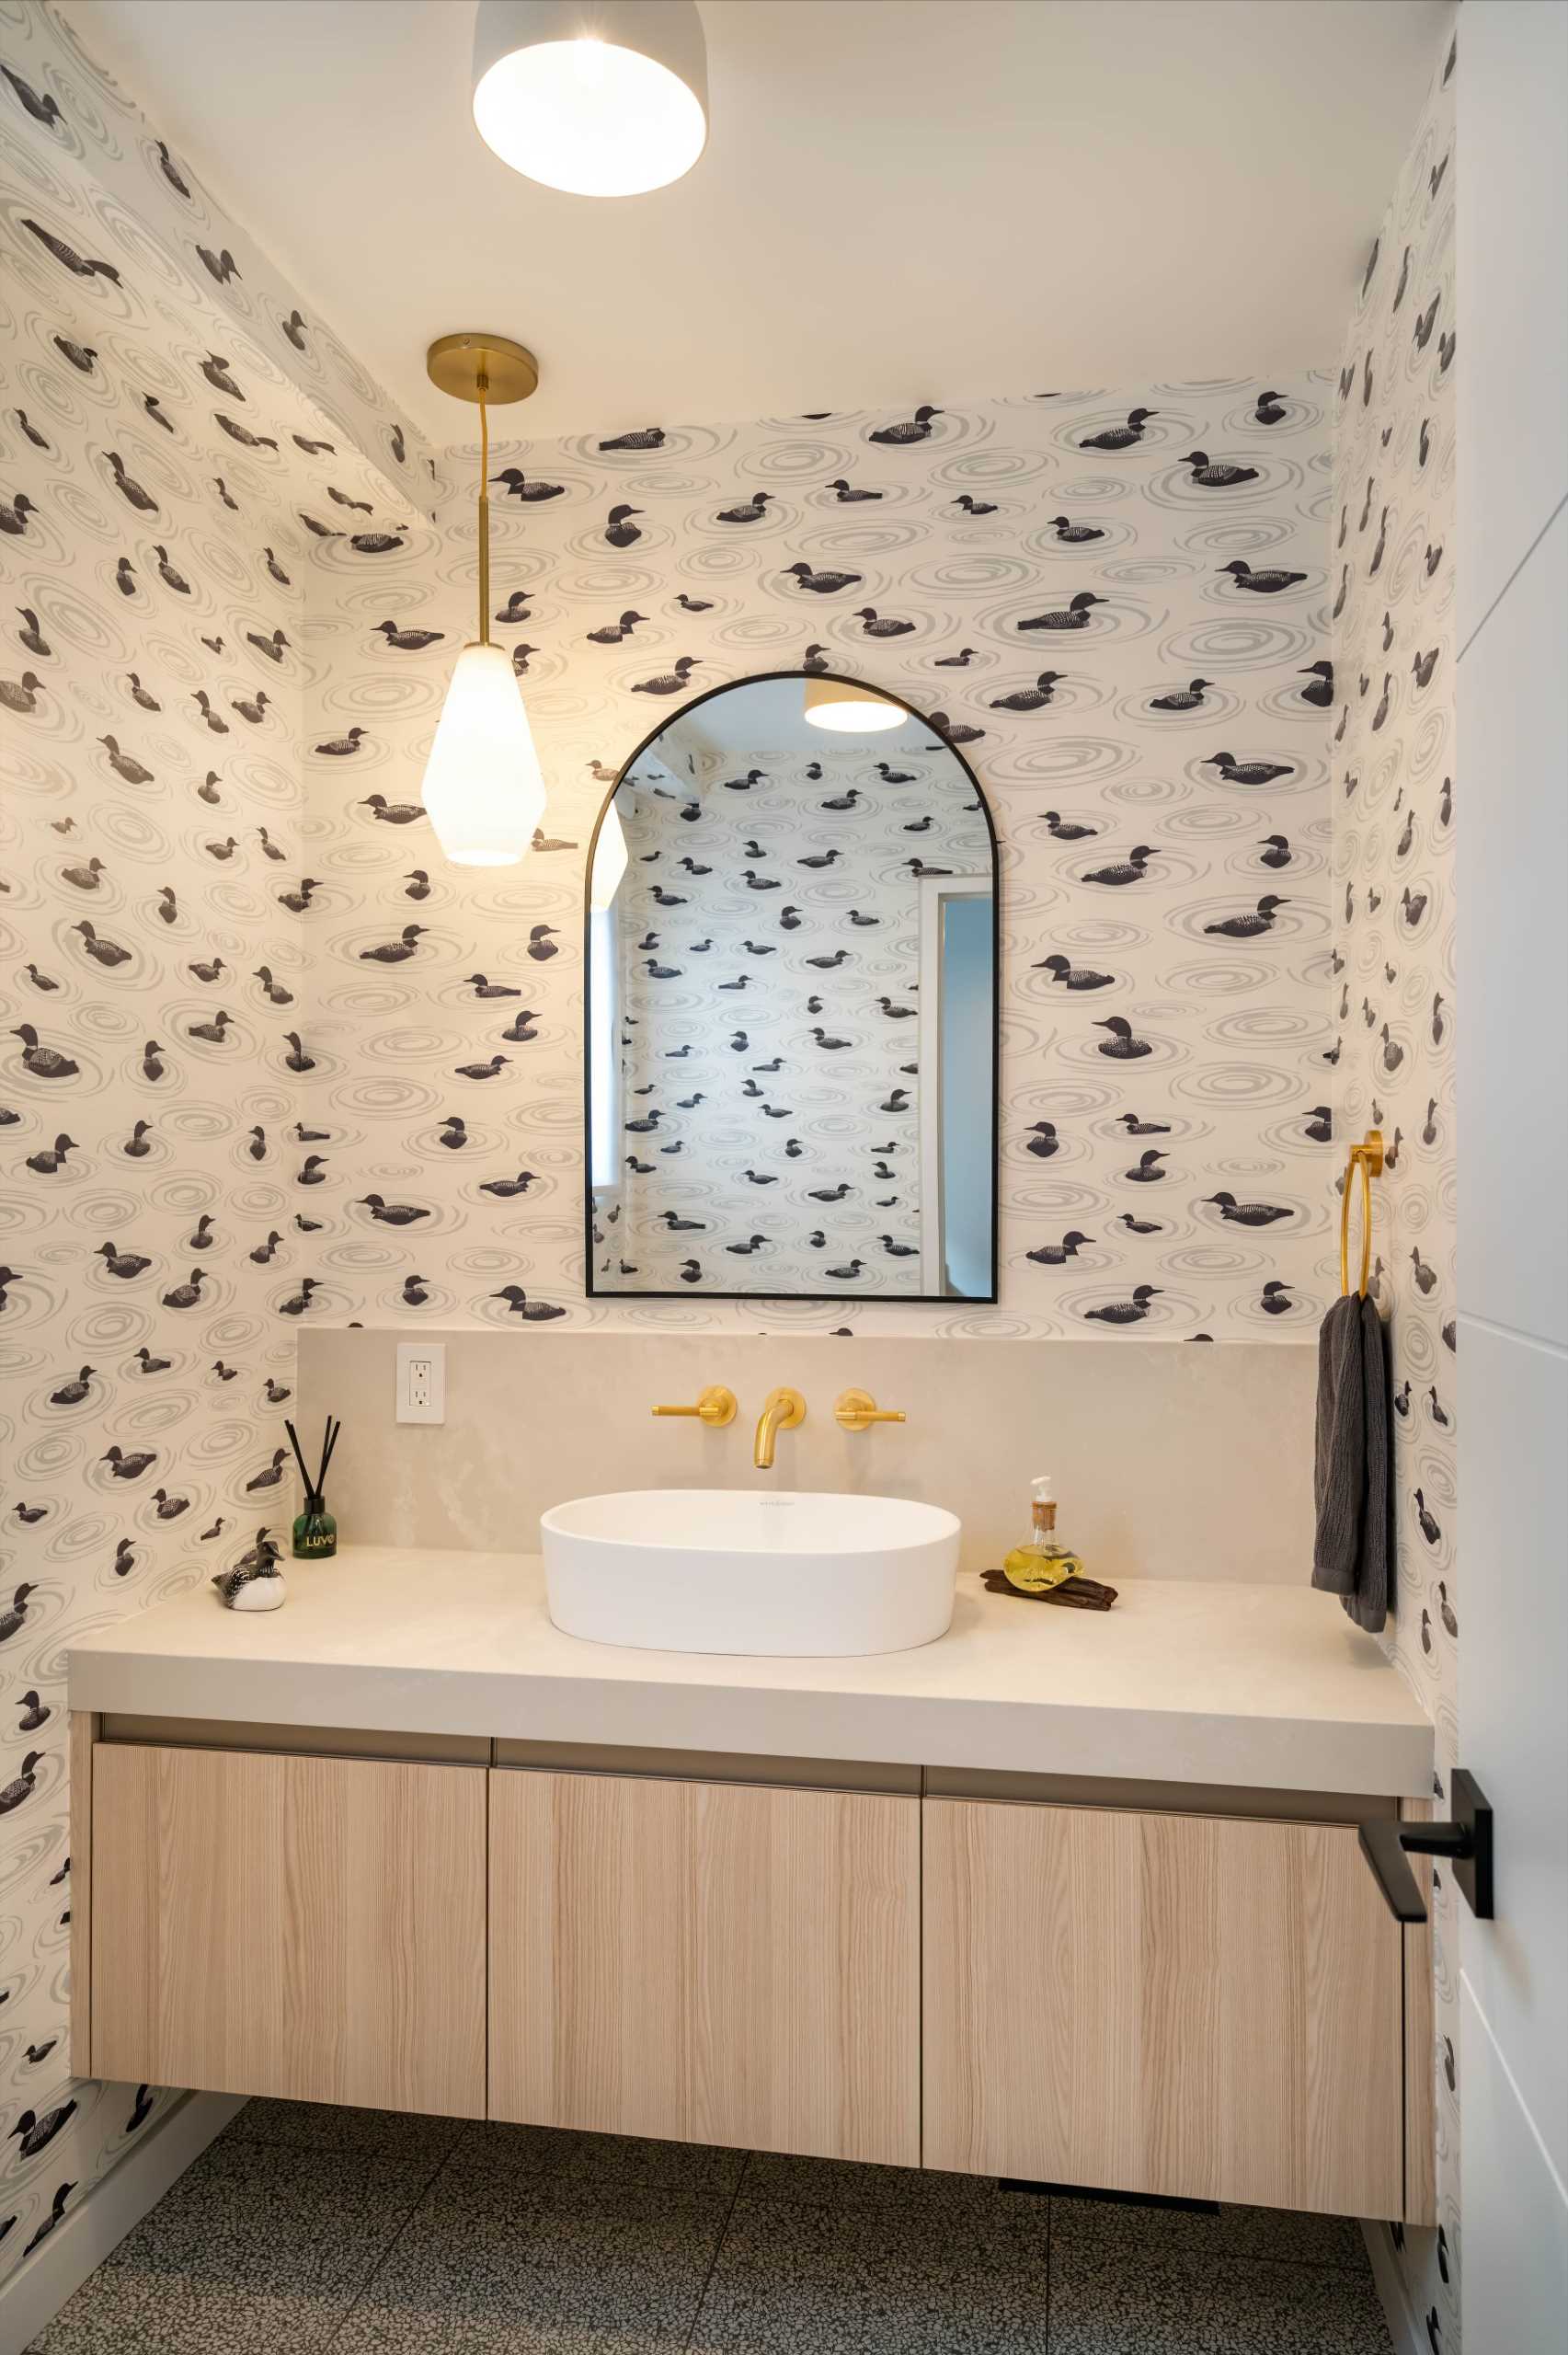 A modern powder room that features wallpaper with a duck print.